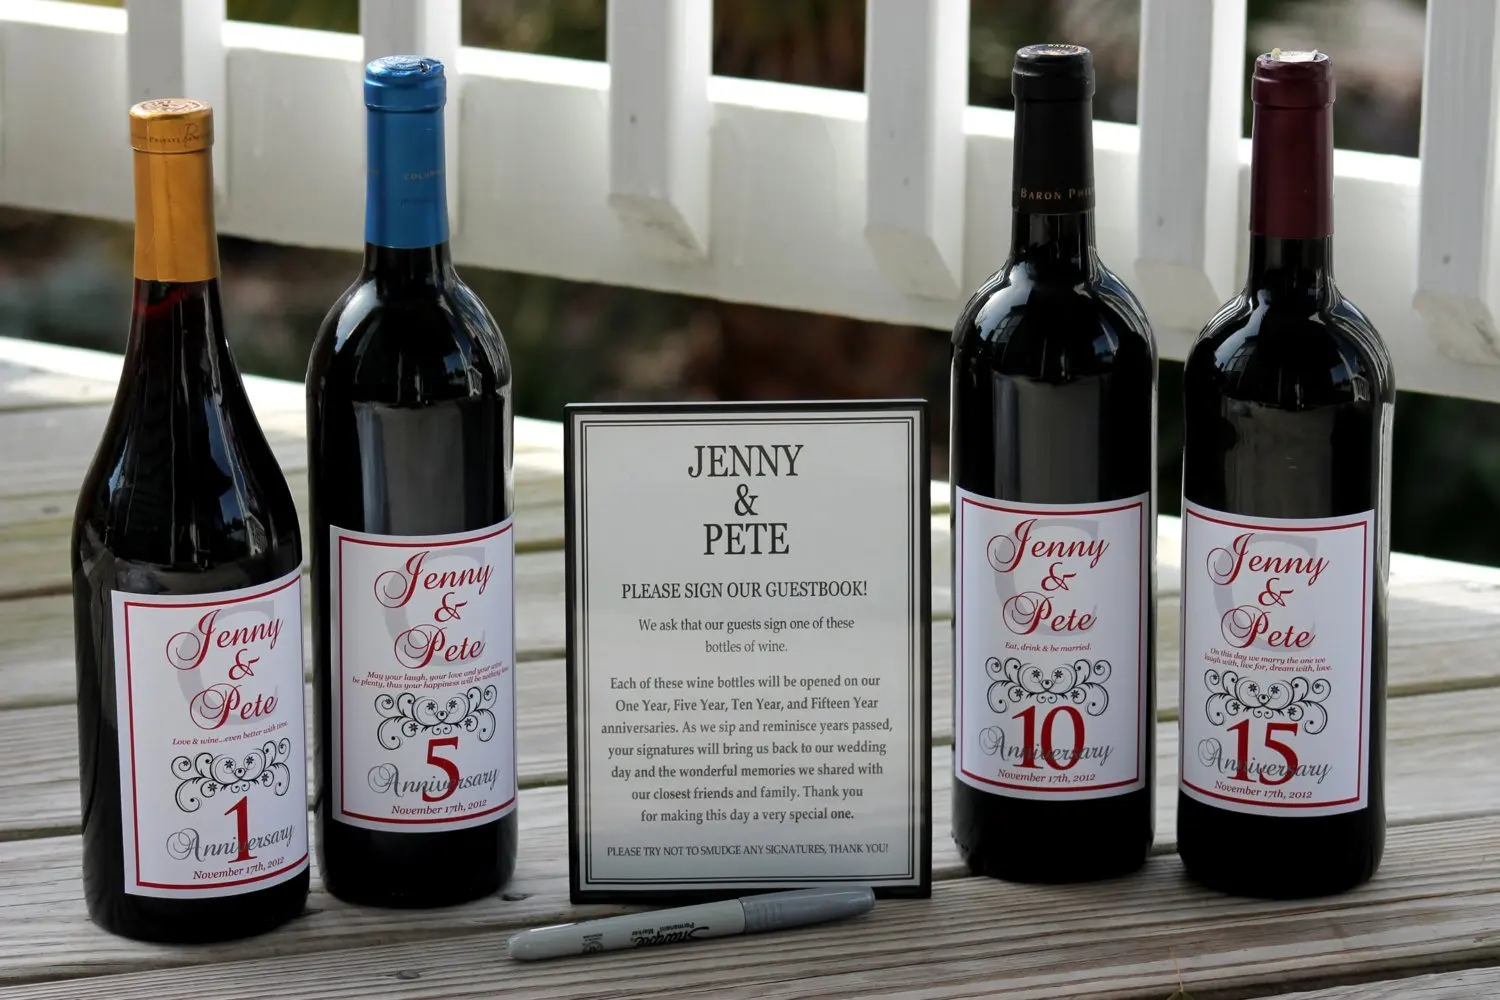 Cheap Wine Labels For Wedding Find Wine Labels For Wedding Deals On